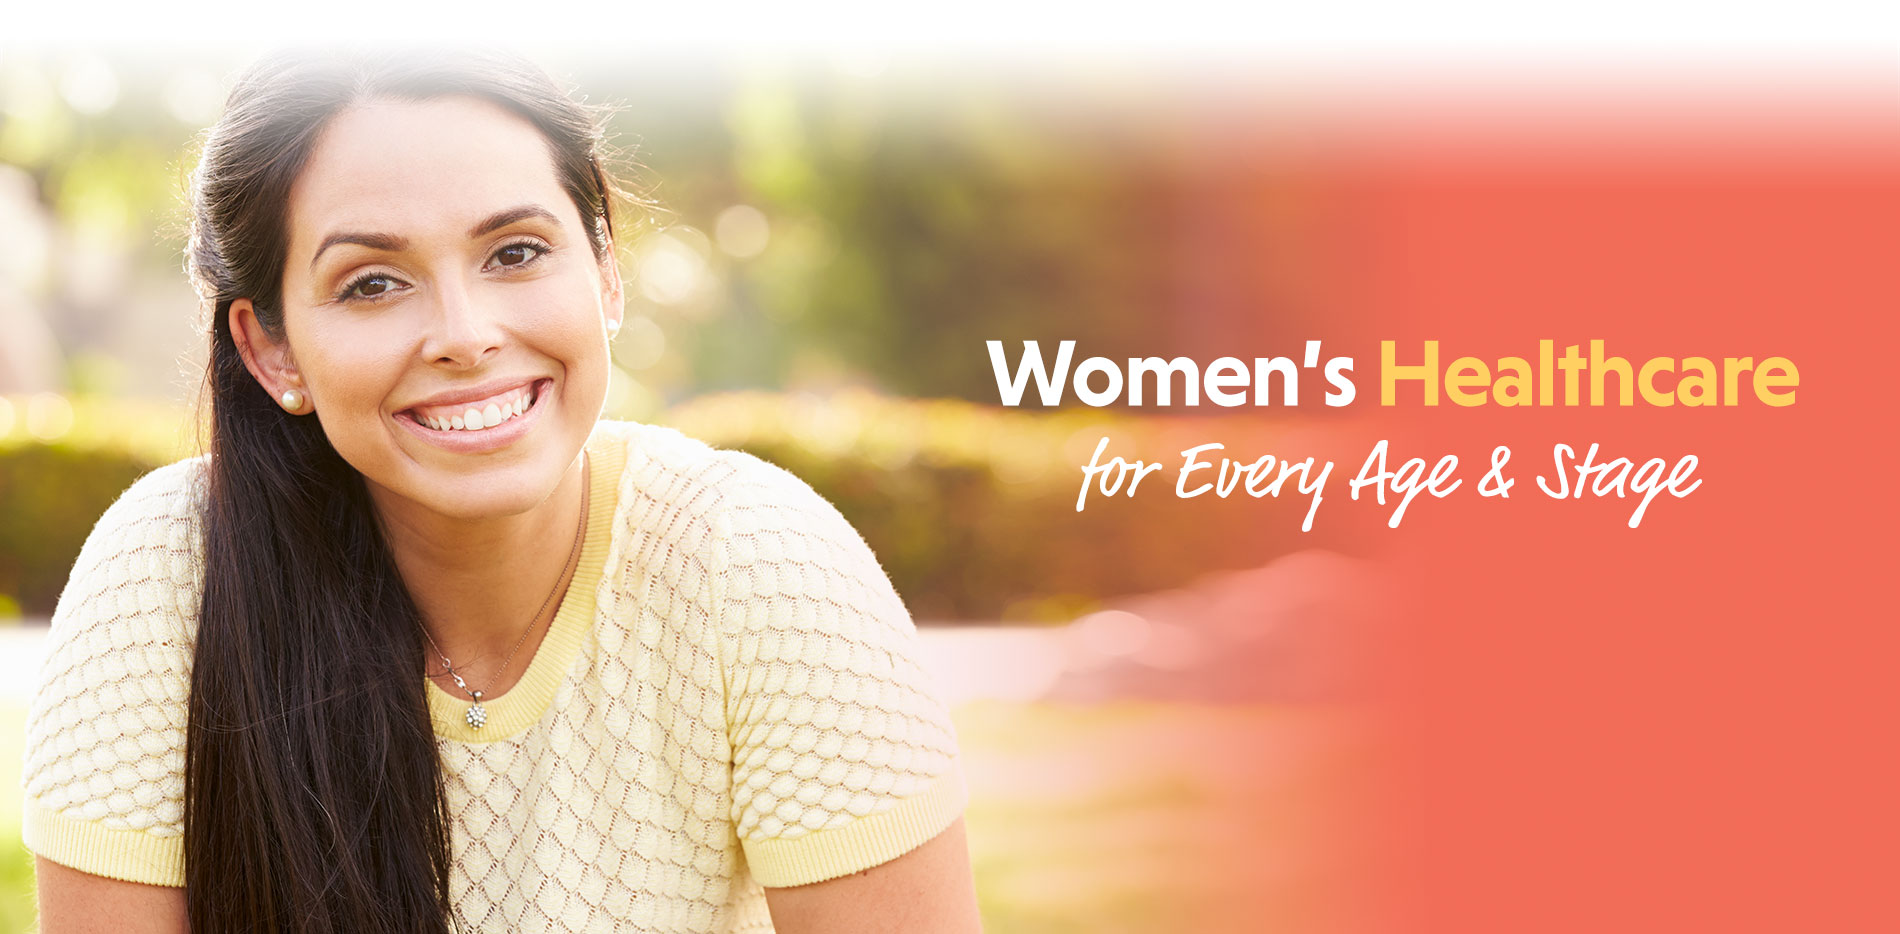 Women’s Healthcare for Every Age & Stage